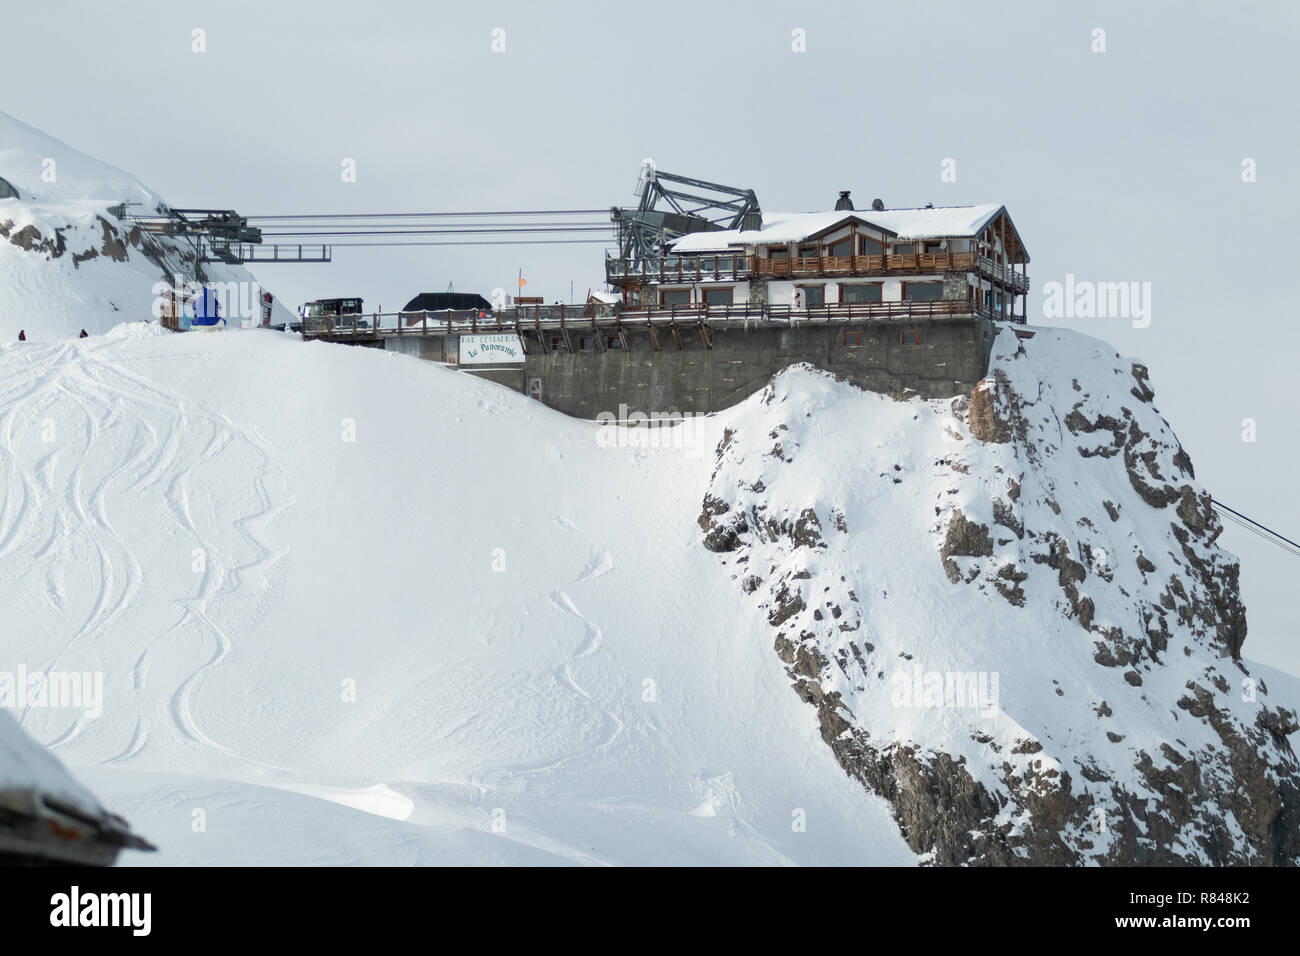 Courchevel Ski Resort Les 3 Vallees Rhone Alpes Savoie France La Saulire Cablecar to the top at 2800 mt. 3 Valleys French Alps winter resorts Stock Photo